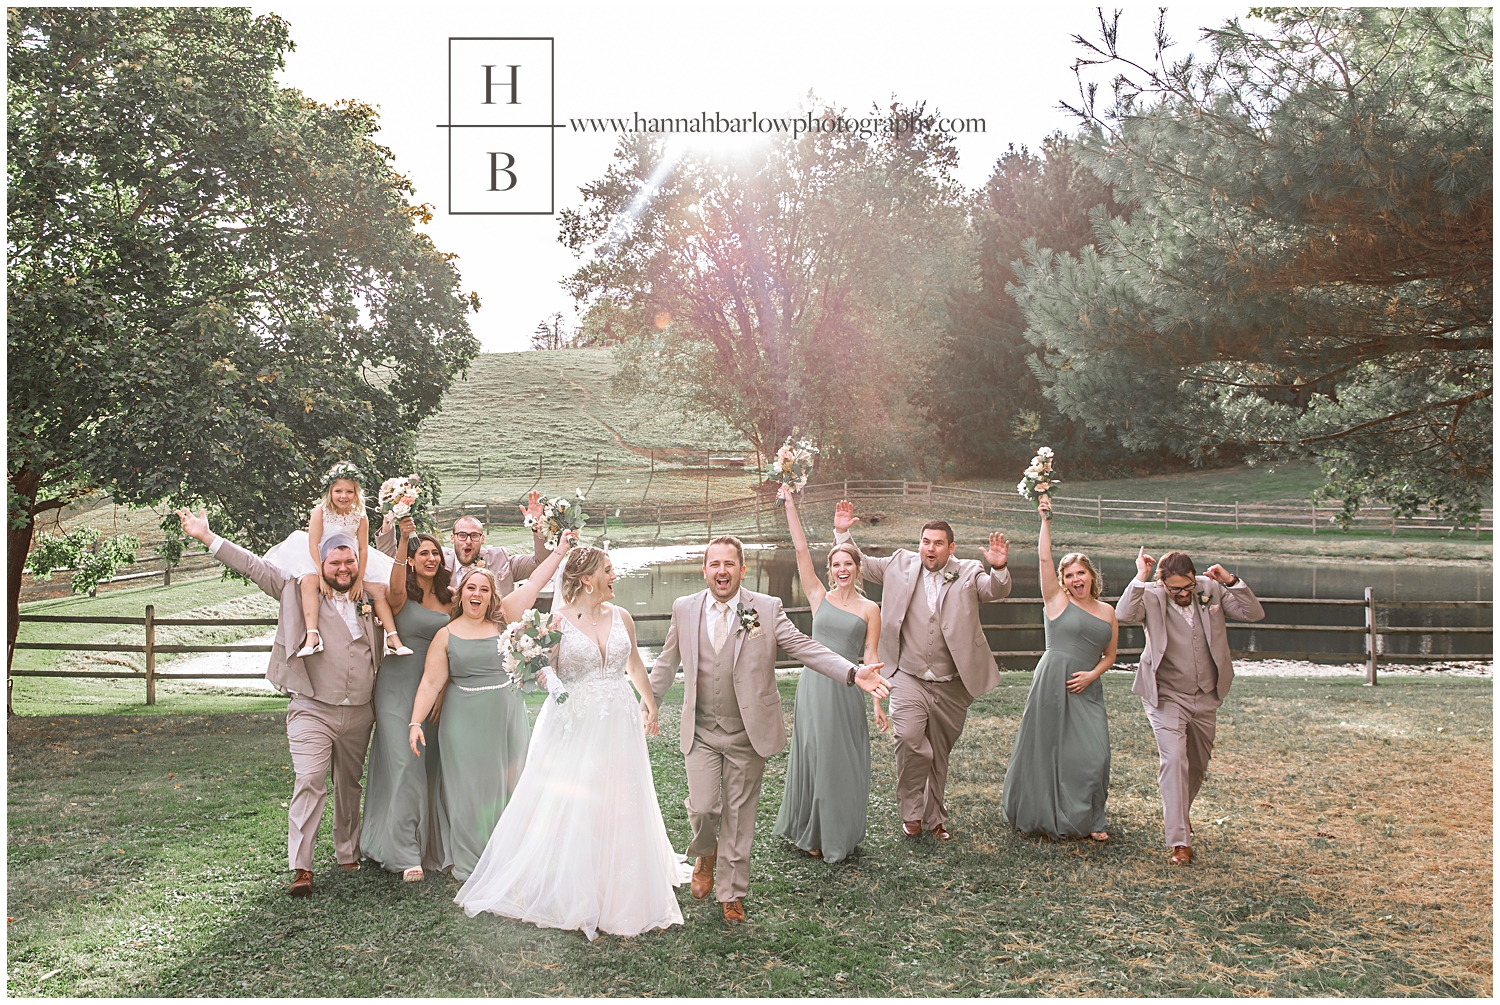 Bridal party walks together with beautiful golden hour behind them.